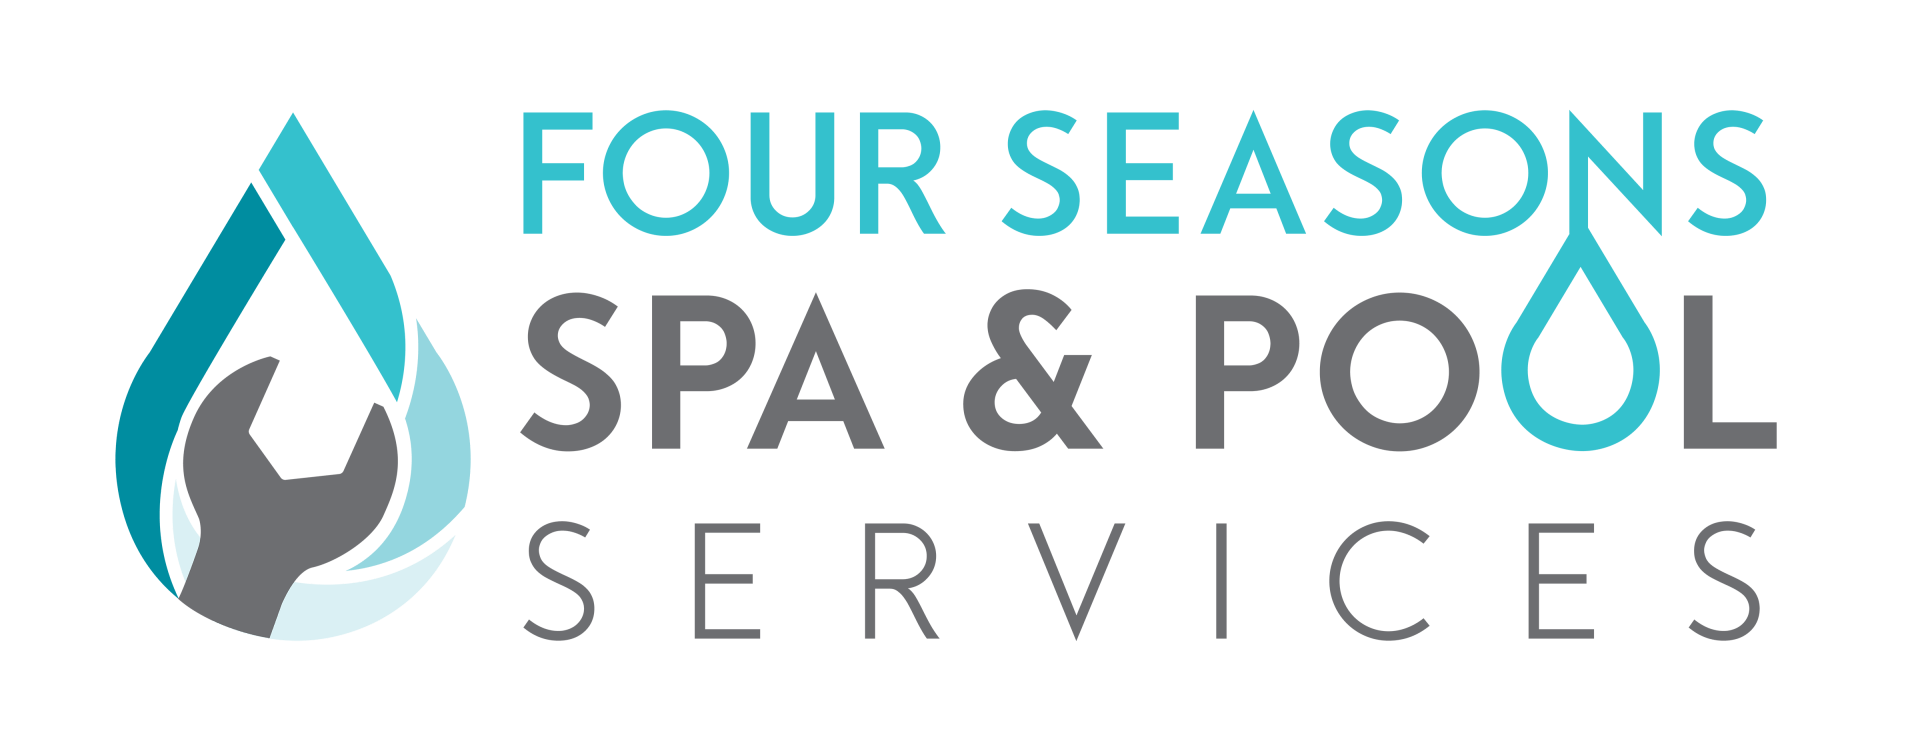 Four Seasons Spa and Pool Services